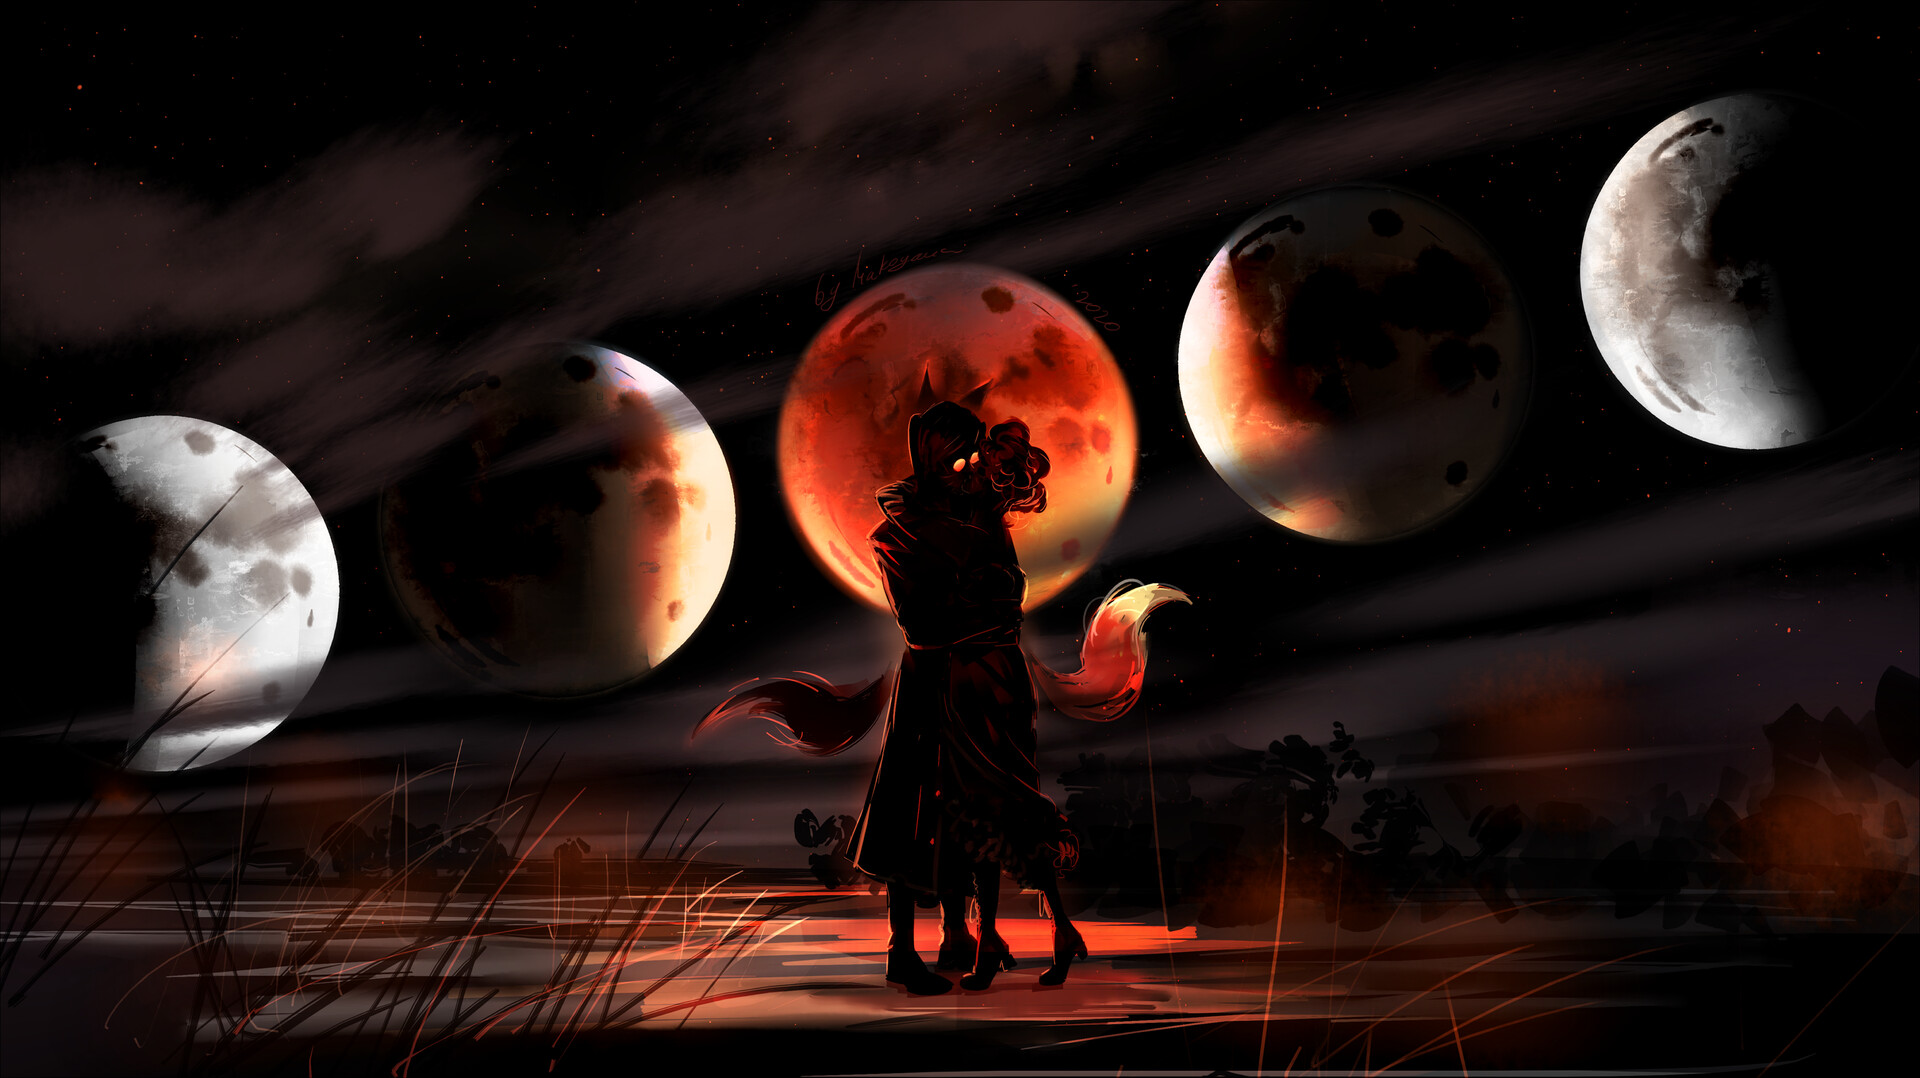 Once in a blood moon.